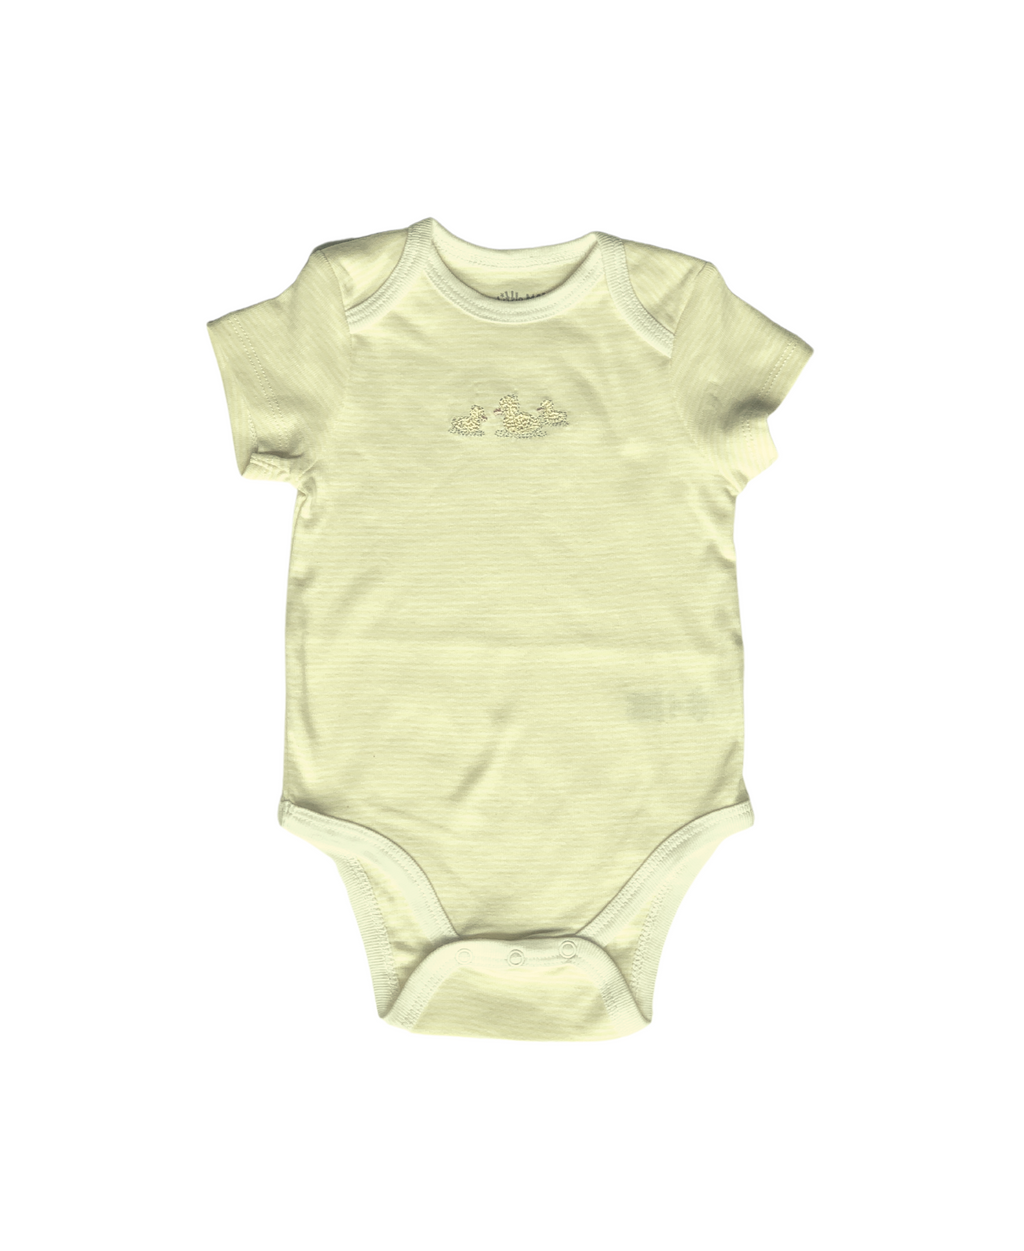 Ducks Bodysuit - Gift with purchase - Little Me